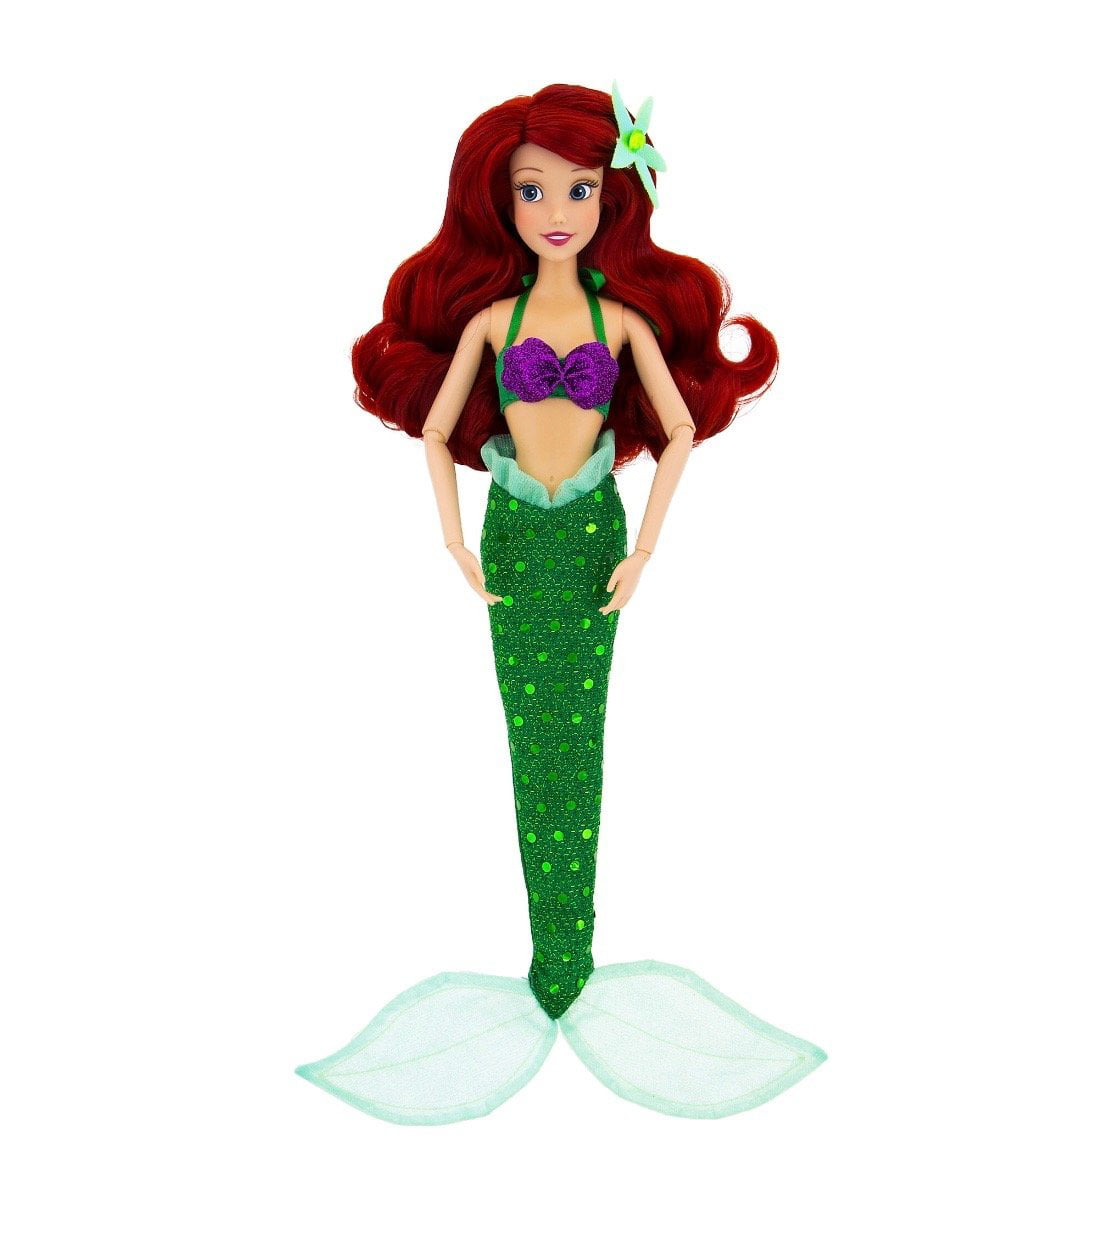 Ariel The Little Mermaid Doll Disney Parks for Ages 3 for sale online